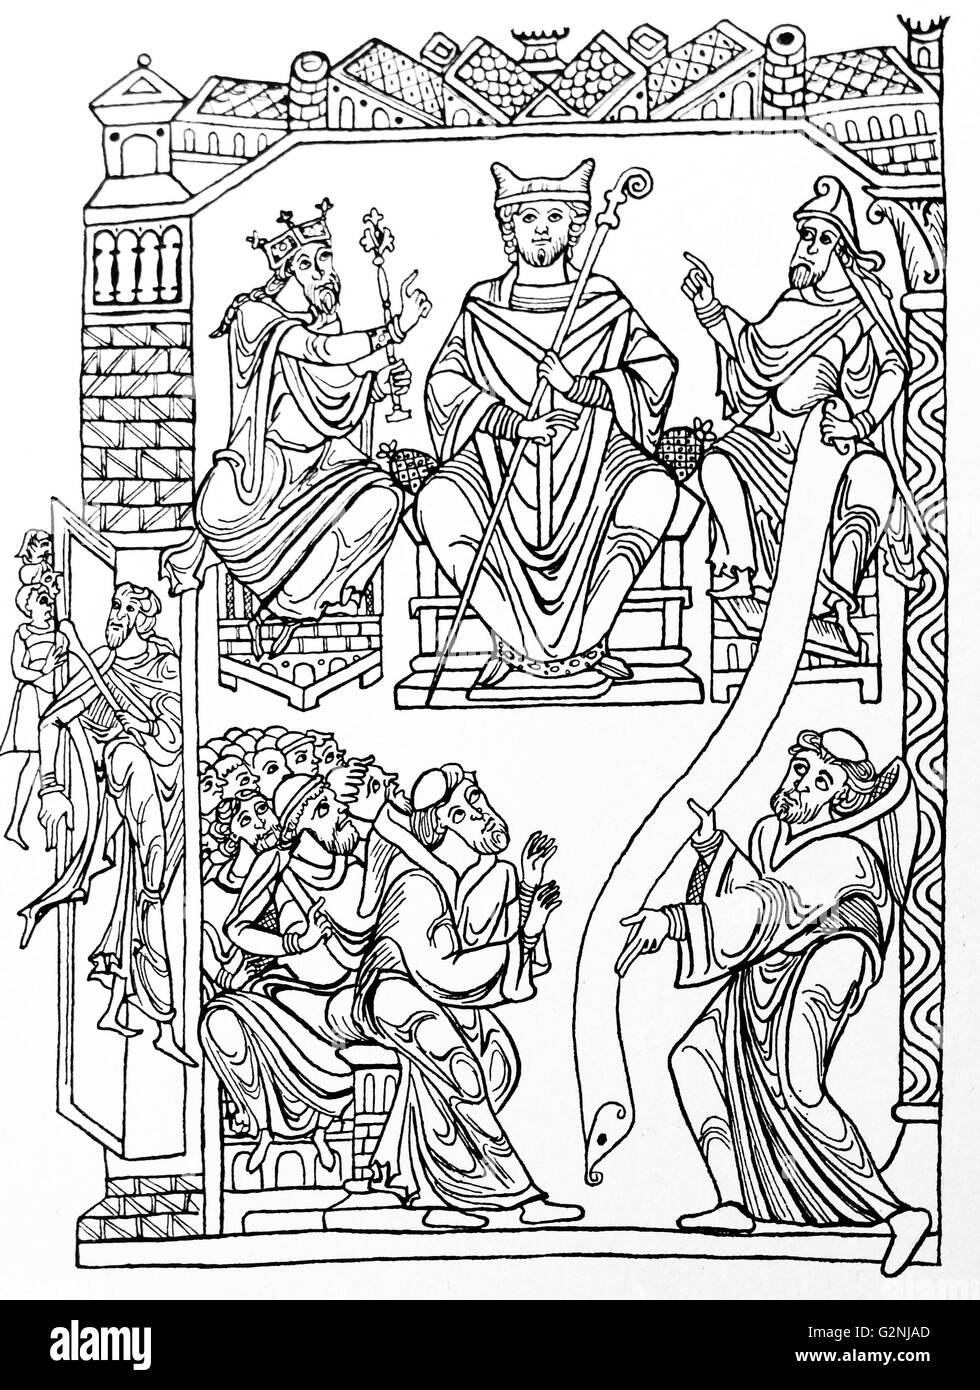 Line drawing of St Benedict handing his book (the Rule) to a group of monks symbolising the foundation of Western monasticism. Dated 12th Century Stock Photo